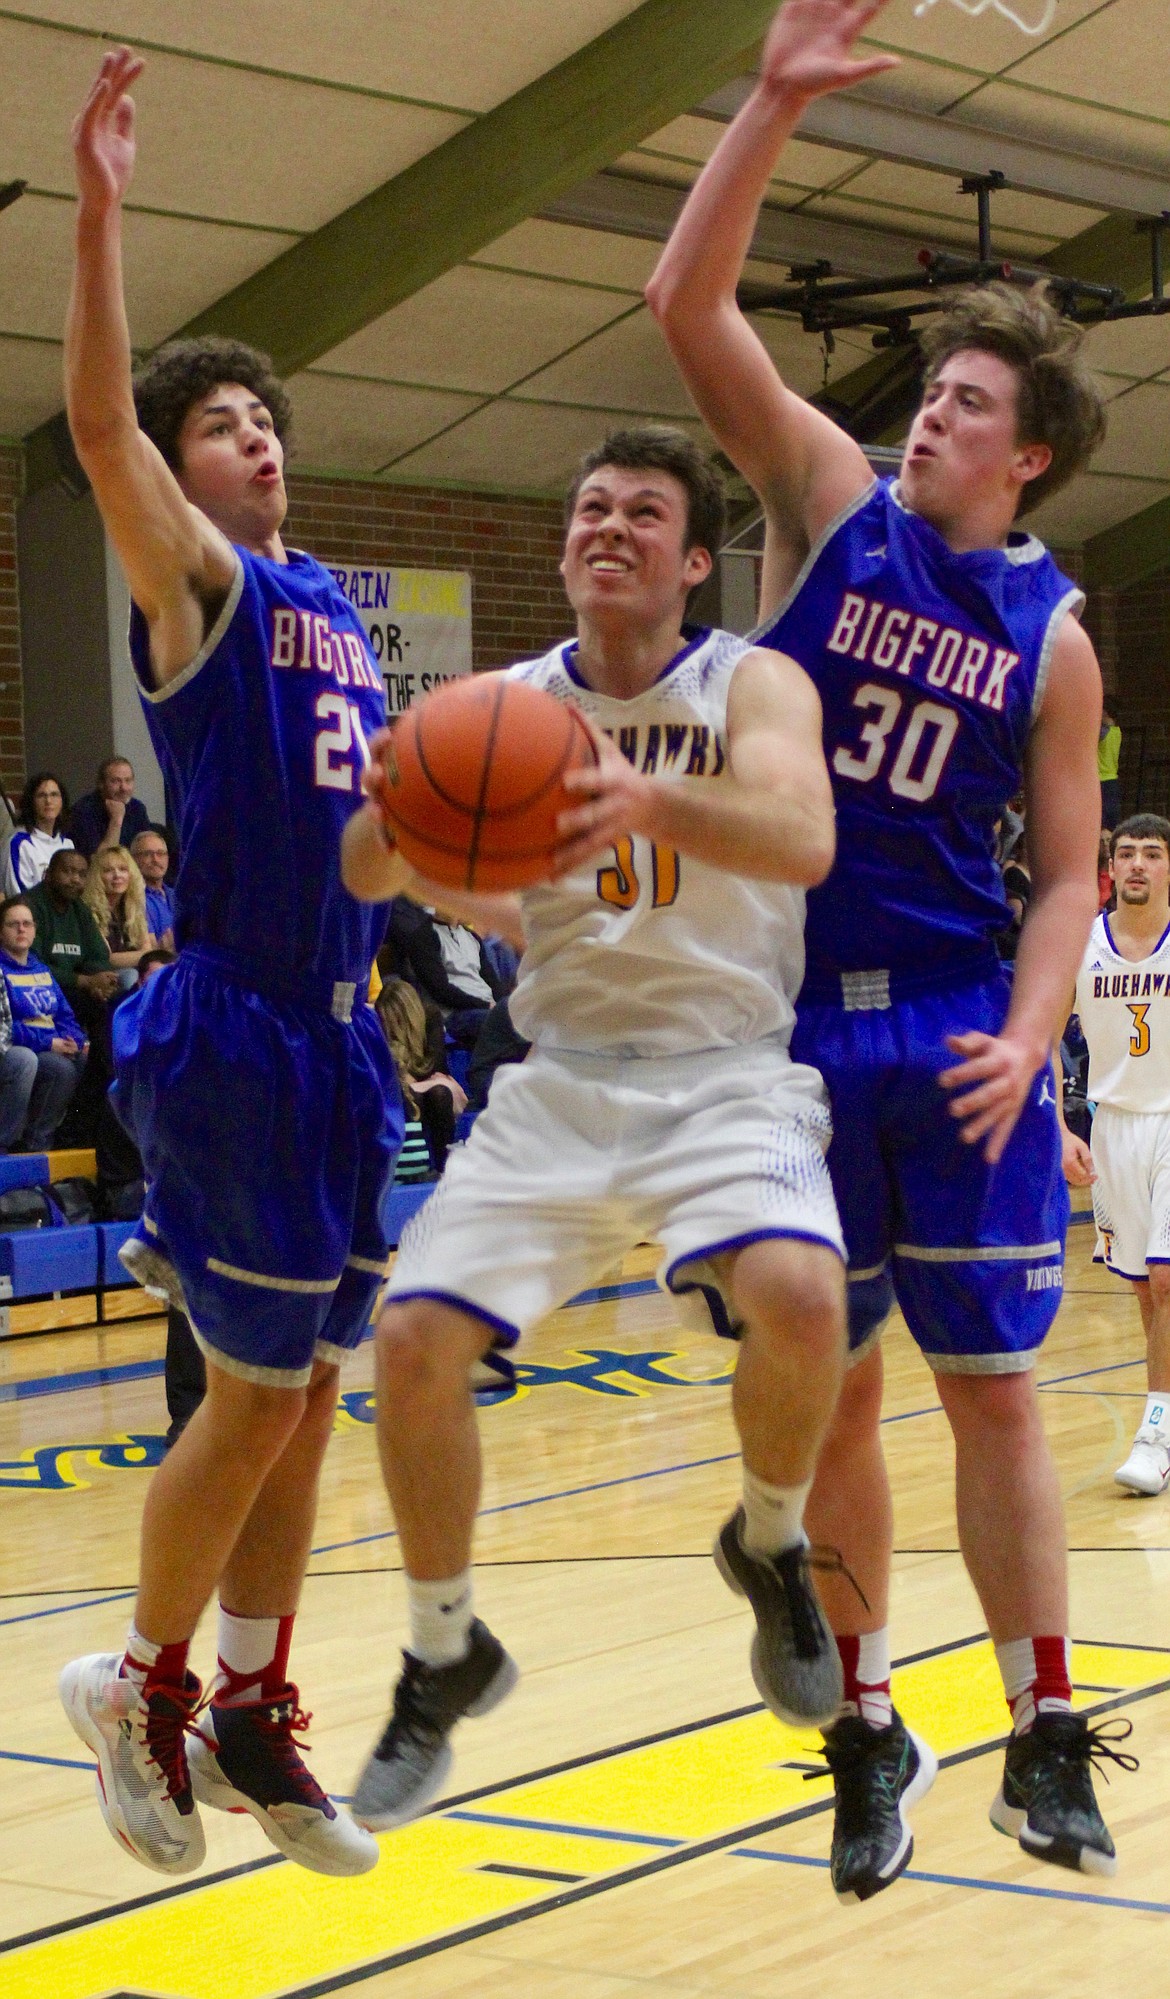 THOMPSON FALLS Bluehawk Nathan Thibeault (31) is crowded at the basket by Bigfork Vikings Chase Chappuis (21) and Logan Gilliard (30).